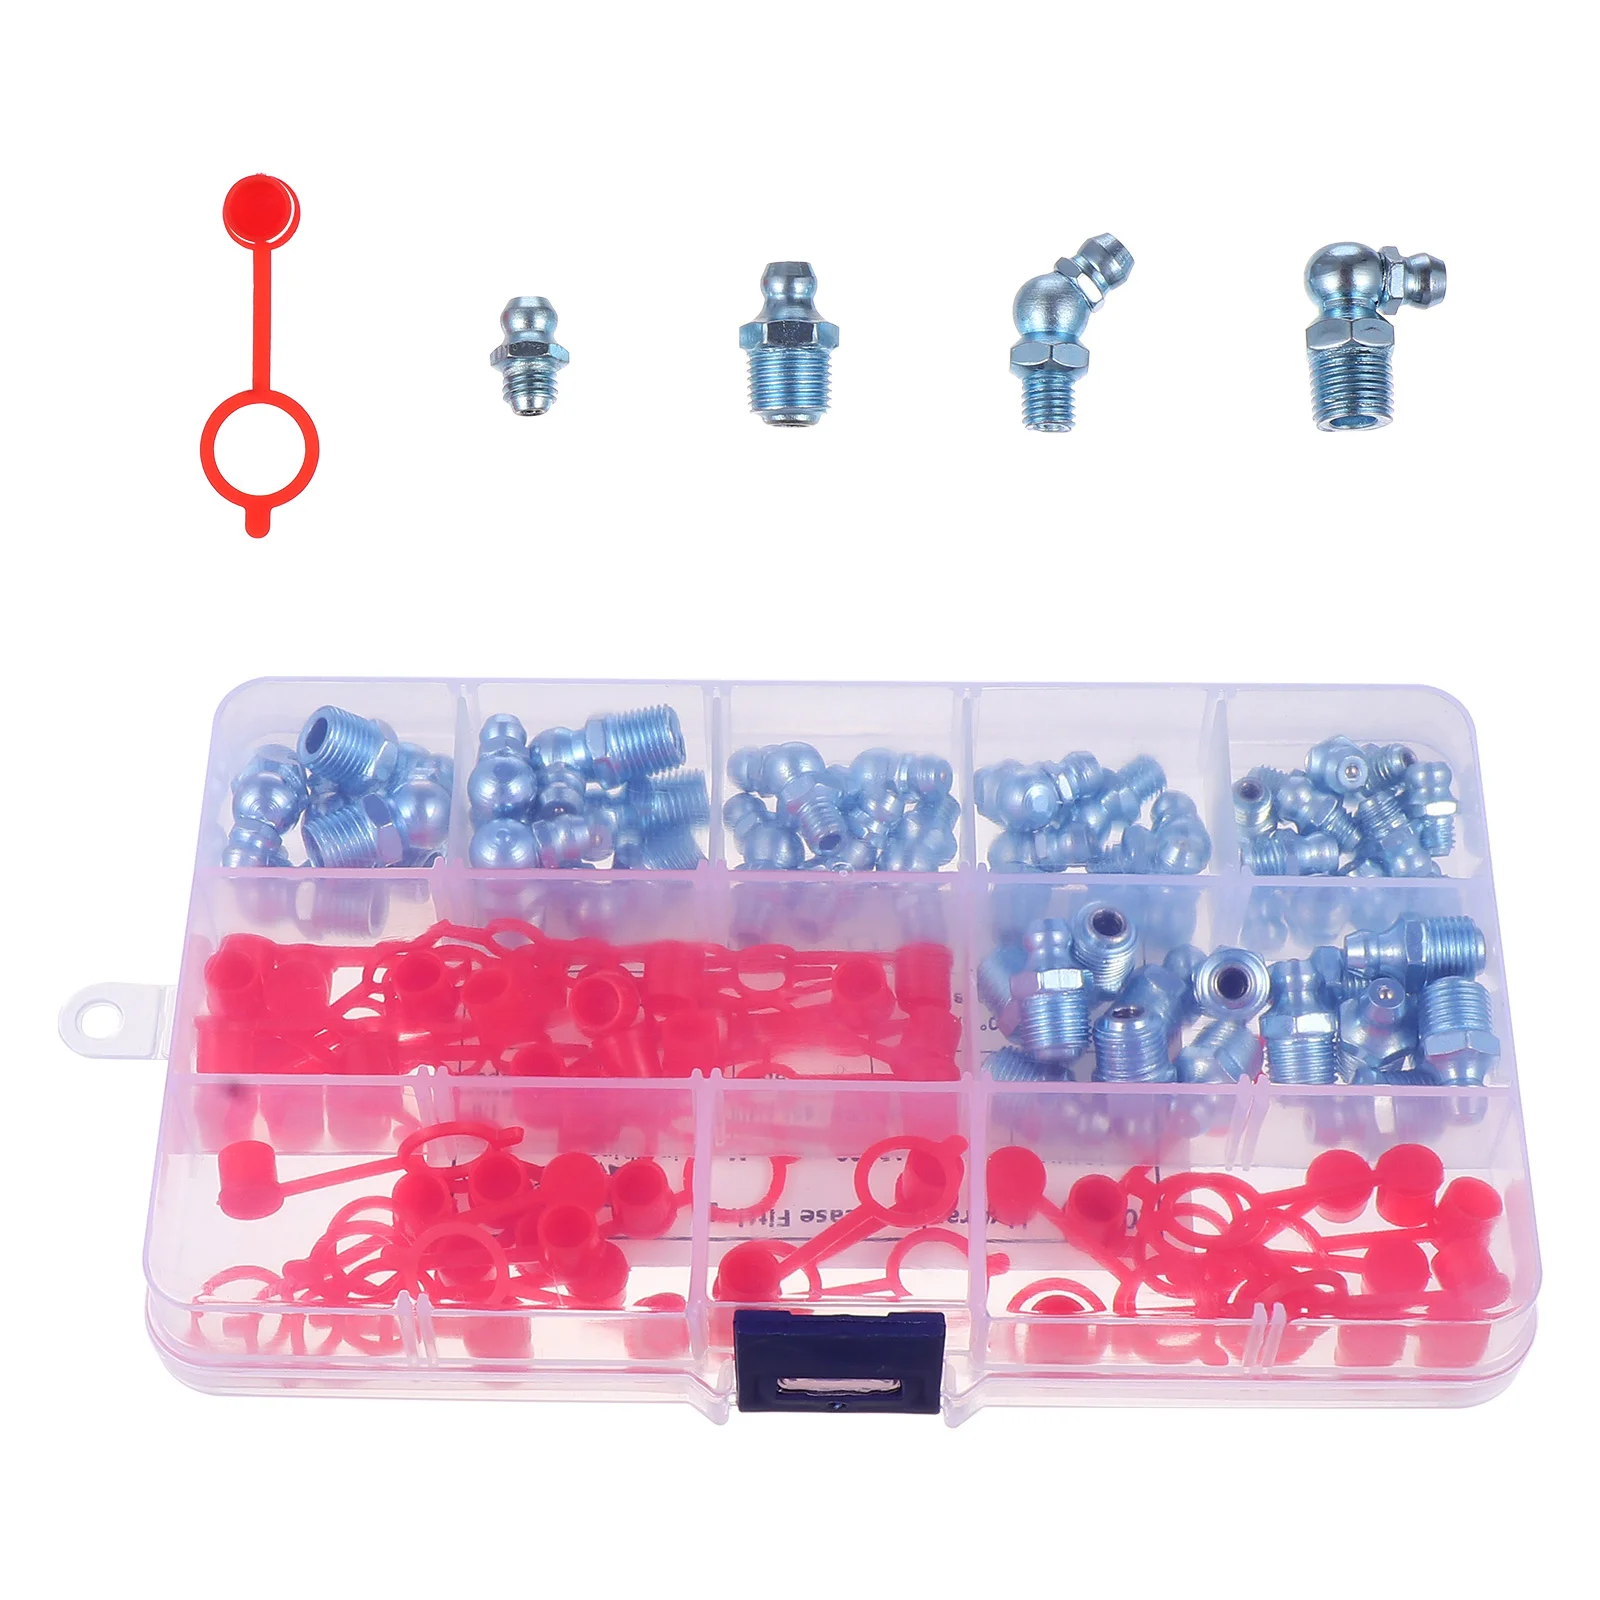 

100 Pcs/set Leaf Spring Nut Zerk Parts Accessories Metal Grease Fitting Hat Connector Iron Electroplated Blue Zinc